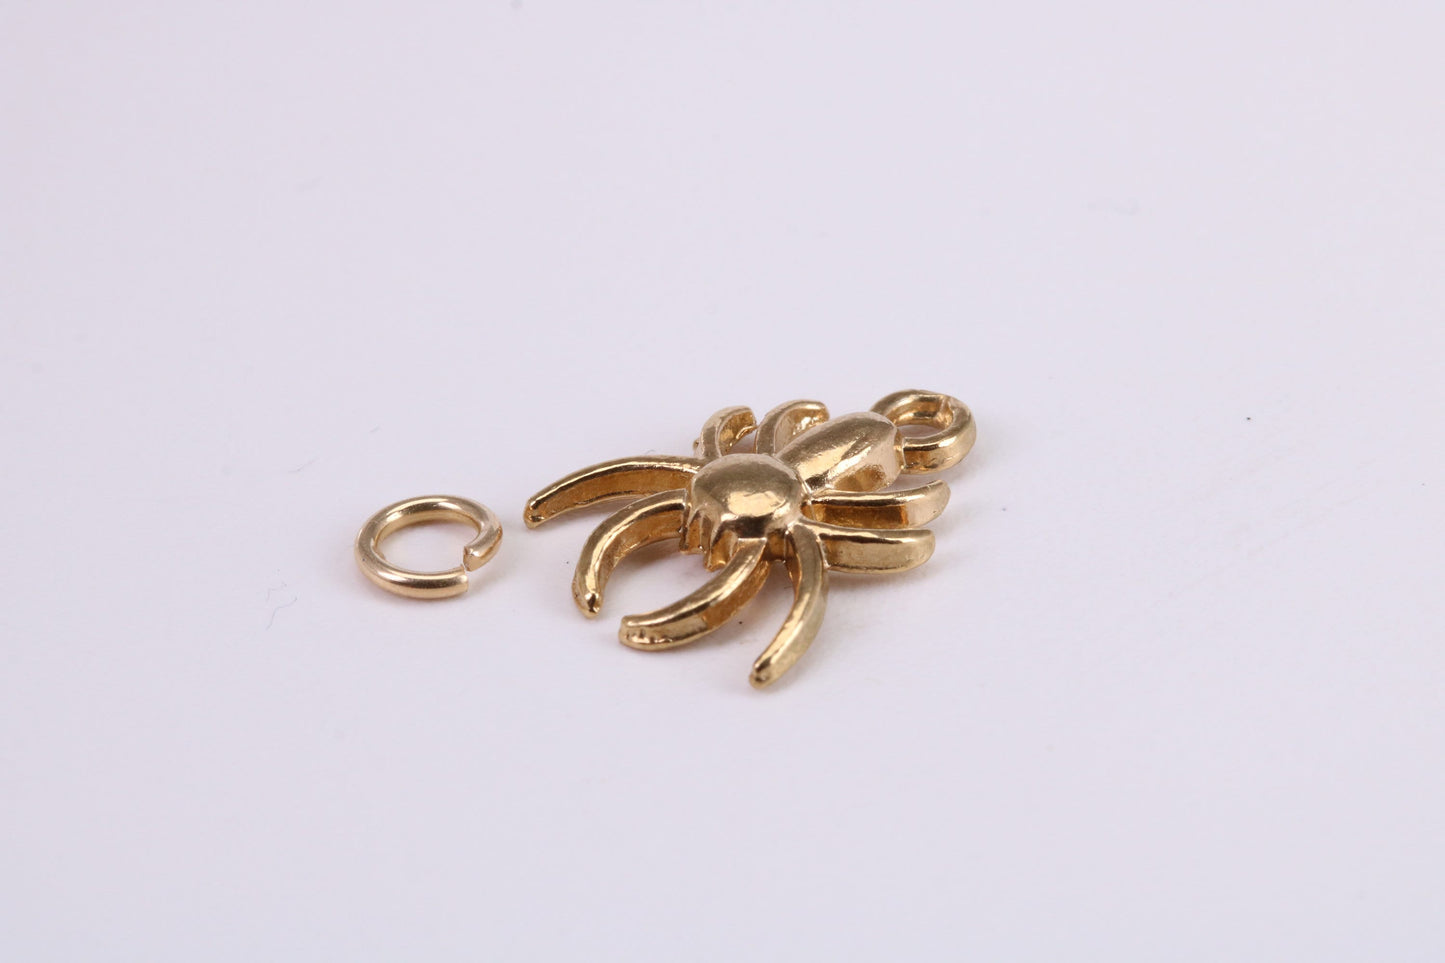 Spider Charm, Traditional Charm, Made from Solid Yellow Gold, British Hallmarked, Complete with Attachment Link